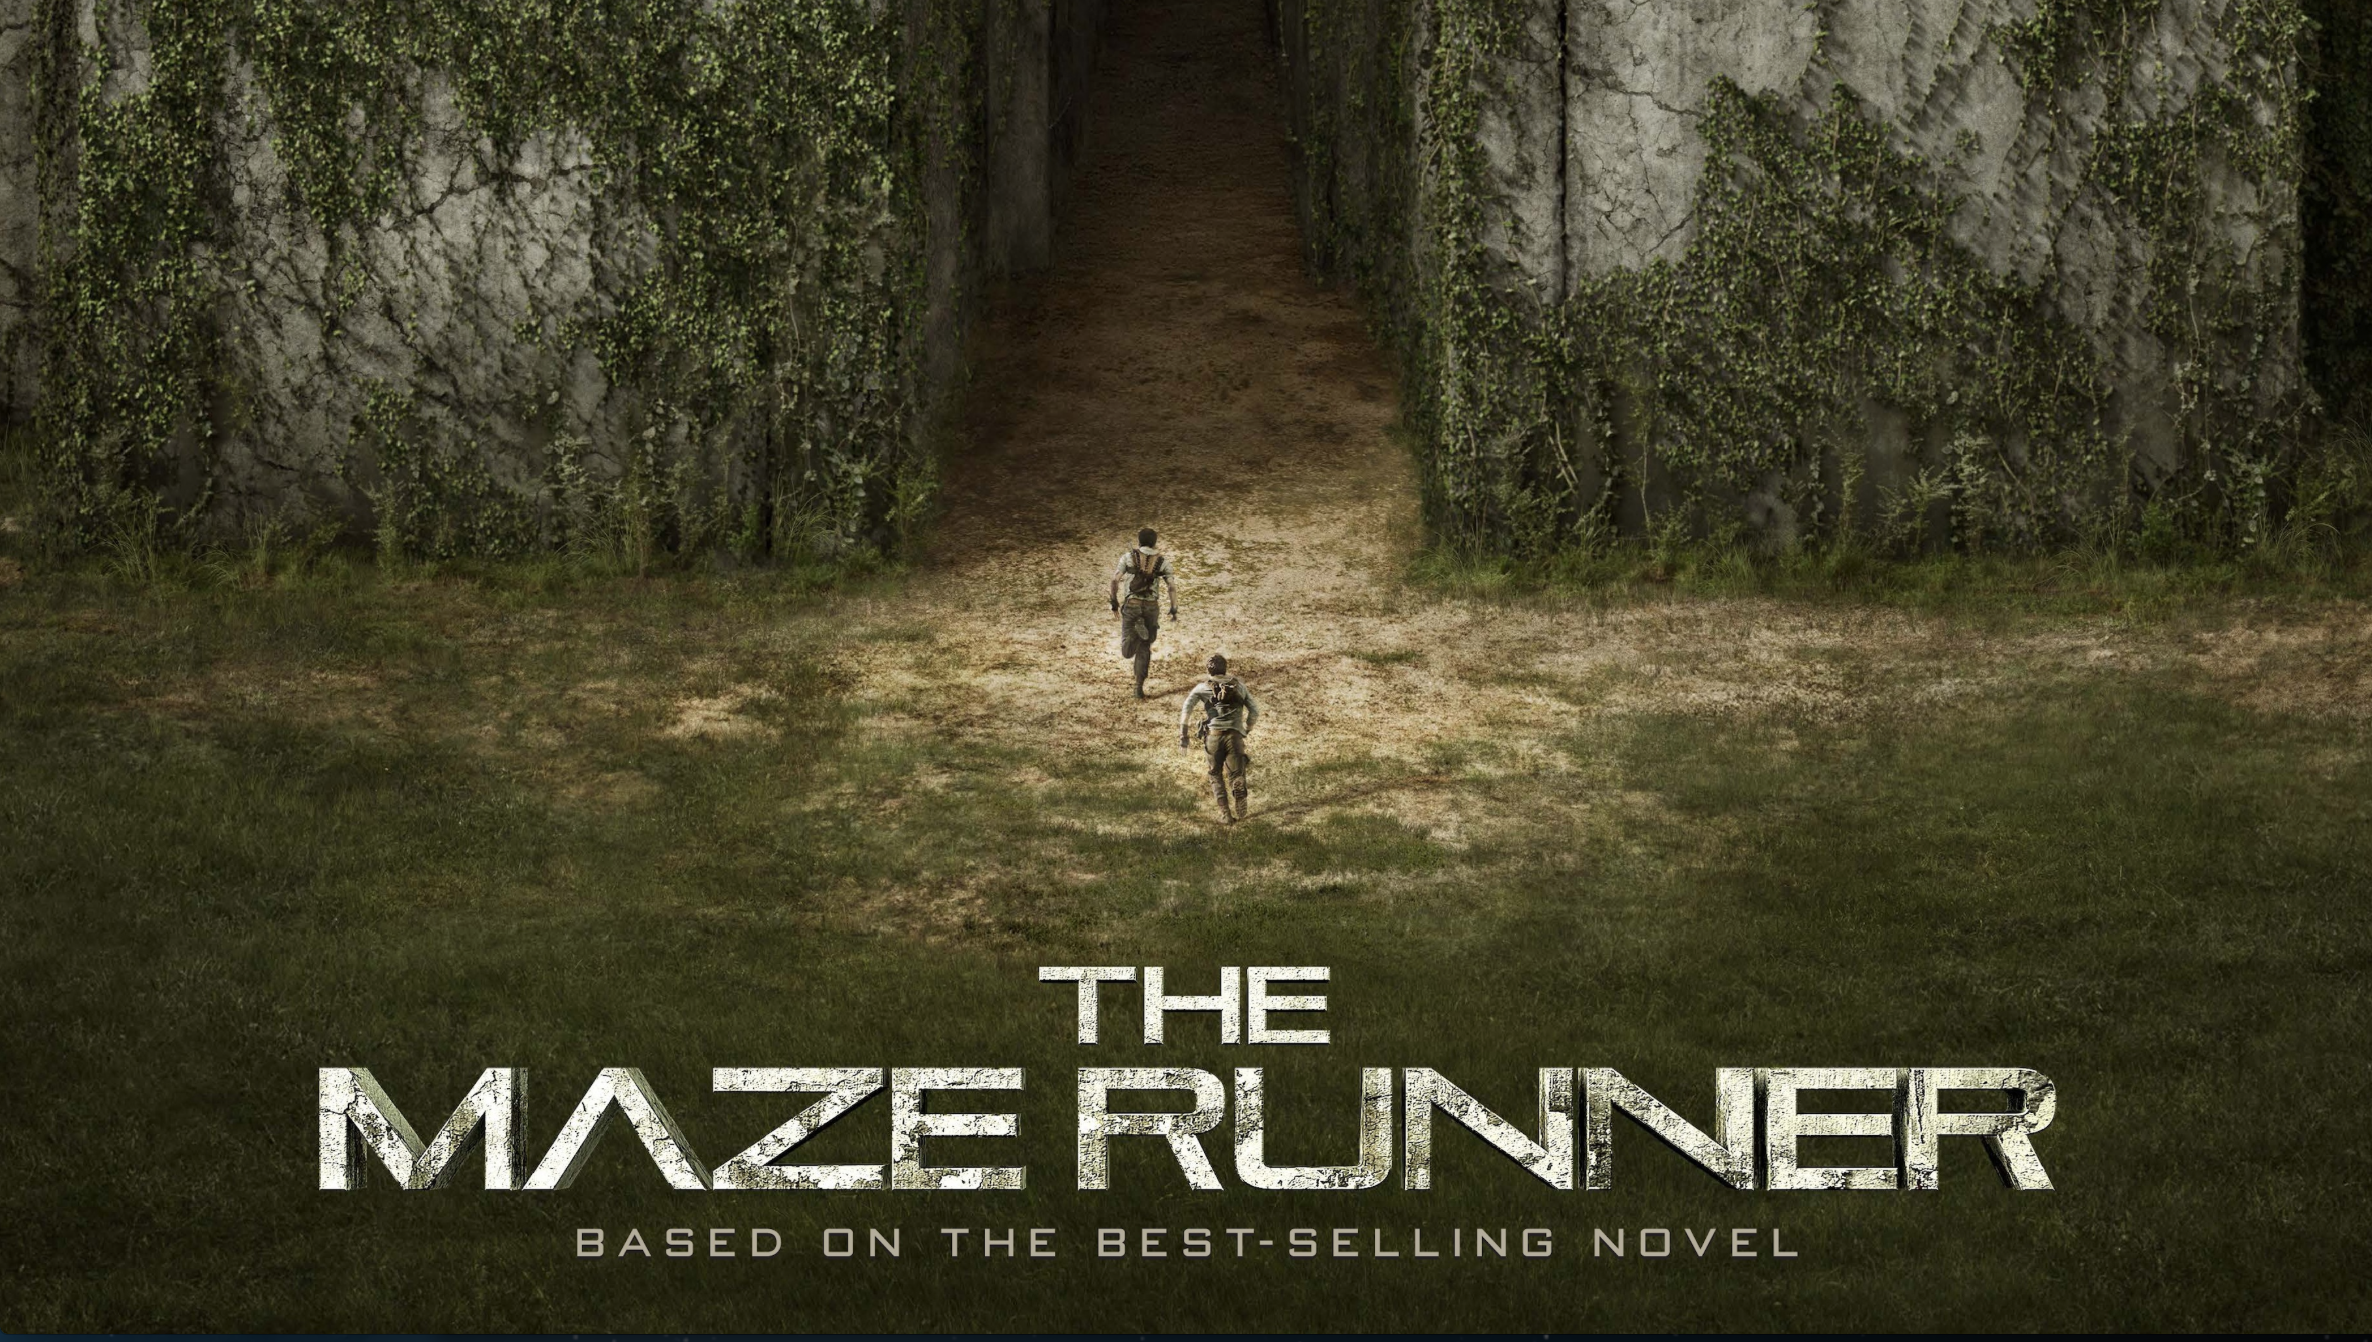 The Maze Runner Backgrounds, Compatible - PC, Mobile, Gadgets| 2372x1342 px